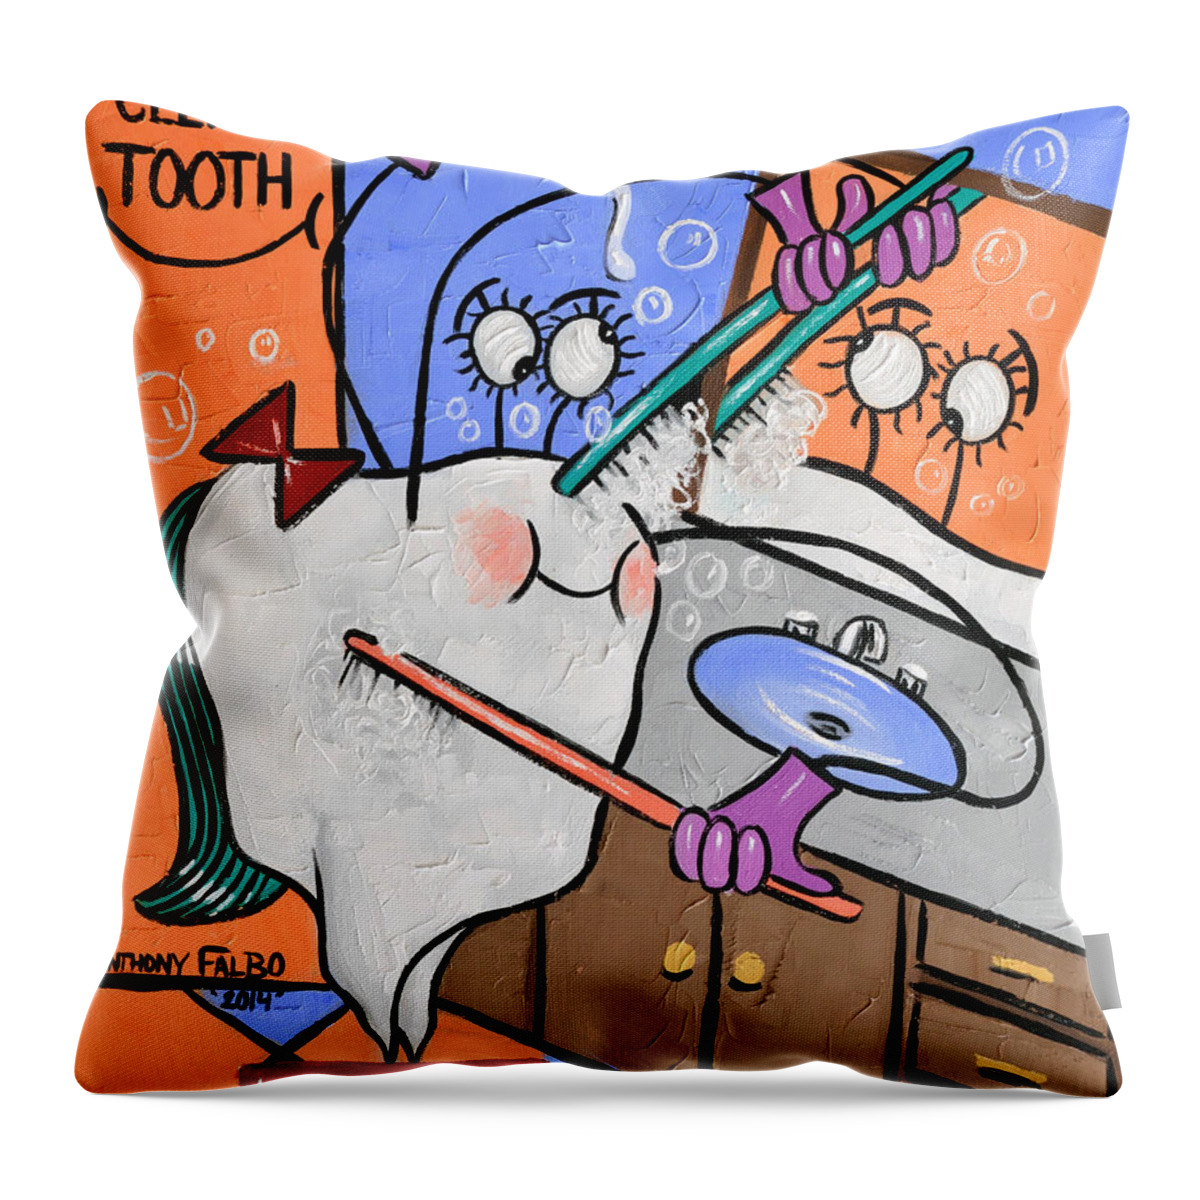 Clean Tooth Throw Pillow featuring the painting Clean Tooth by Anthony Falbo